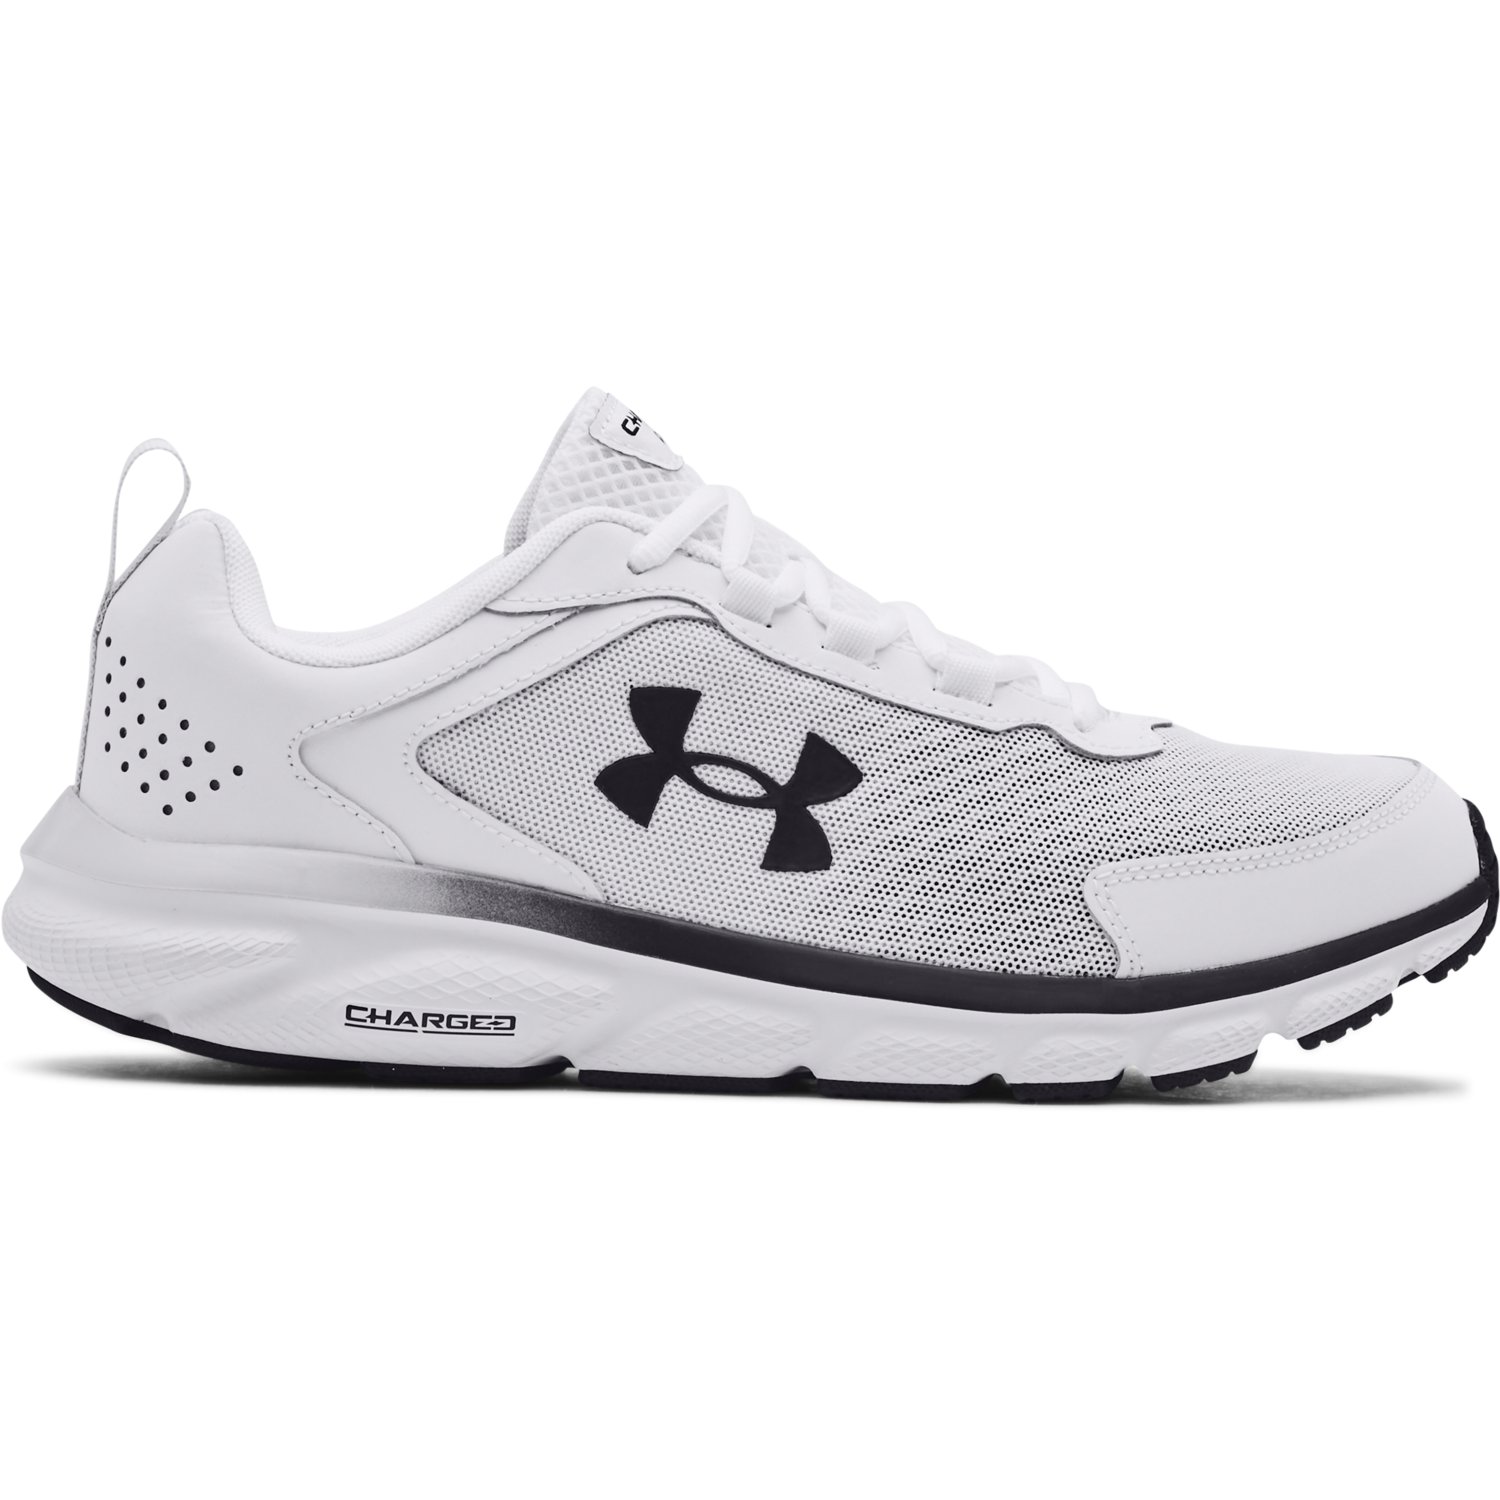 Tenis Under Armour Hombre Negro/Blanco Charged Assert 9 3024590-007 UNDER  ARMOUR